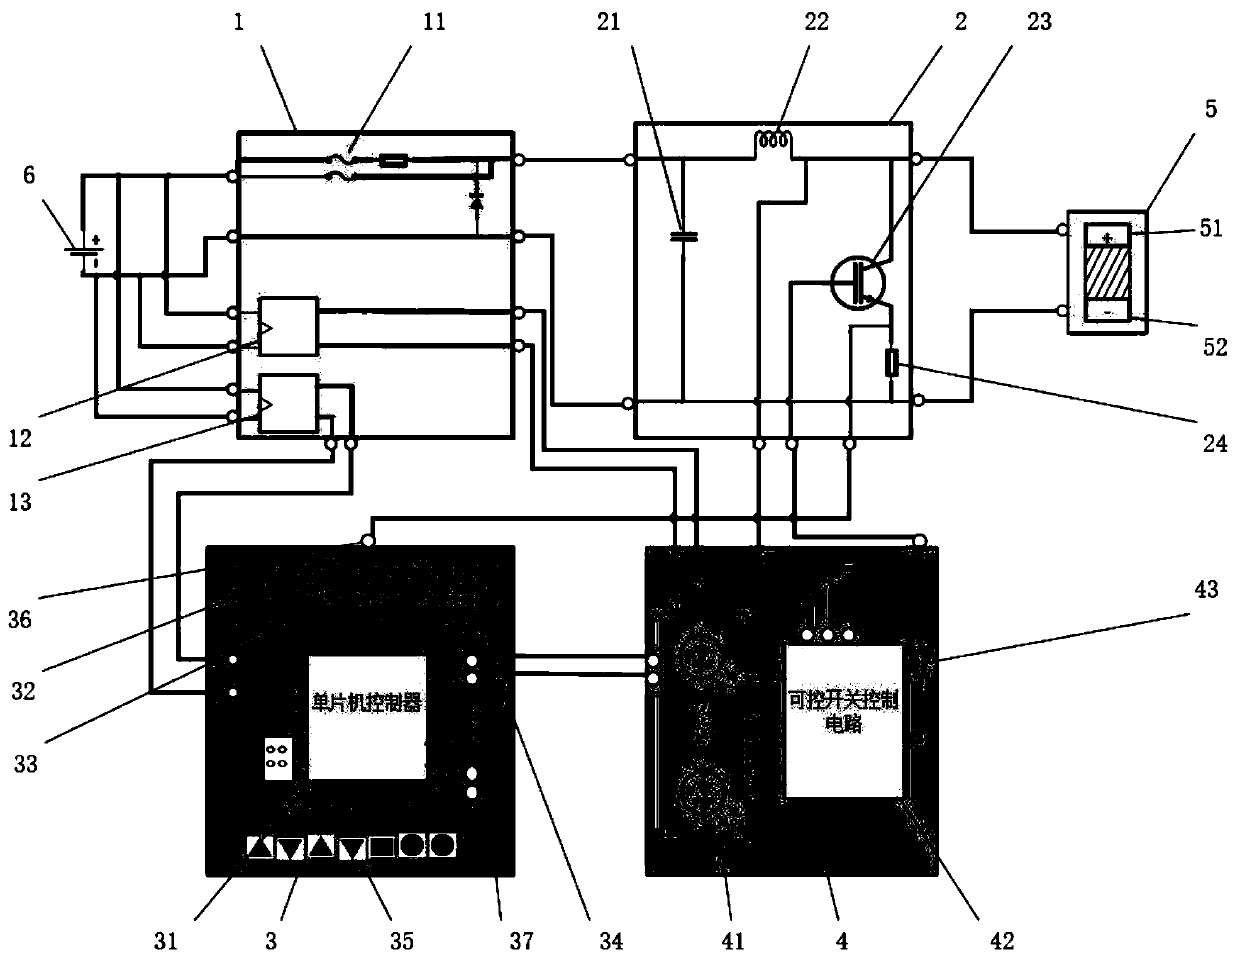 Modular satellite electric propulsion device with adjustable discharge pulses